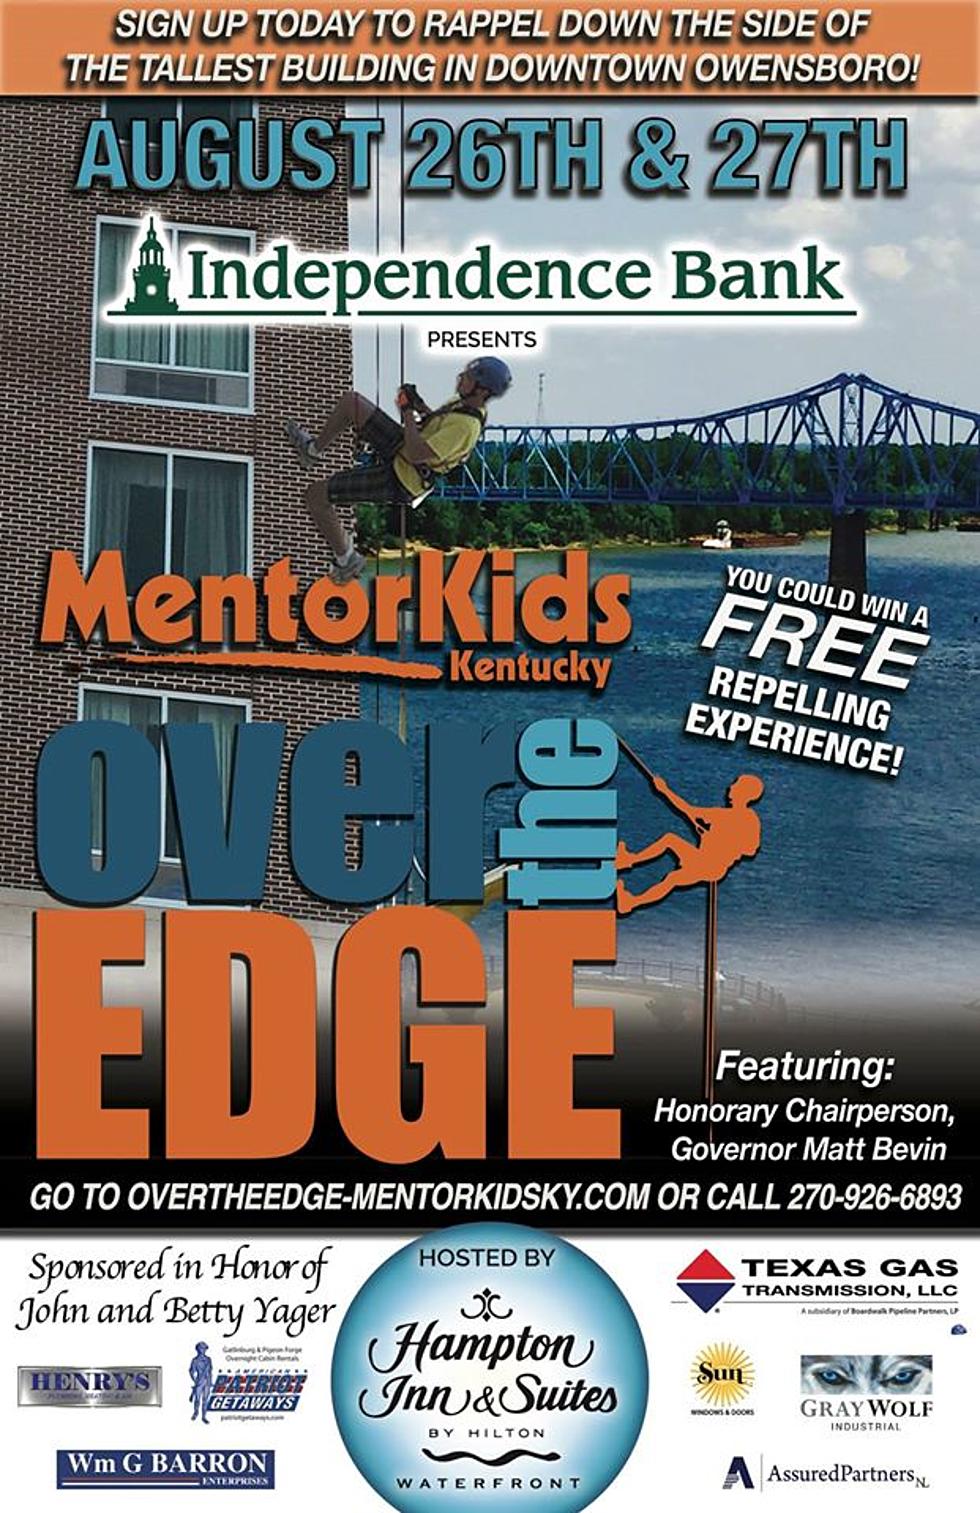 Mentorkids is going OVER THE EDGE! (Shaped by Faith)